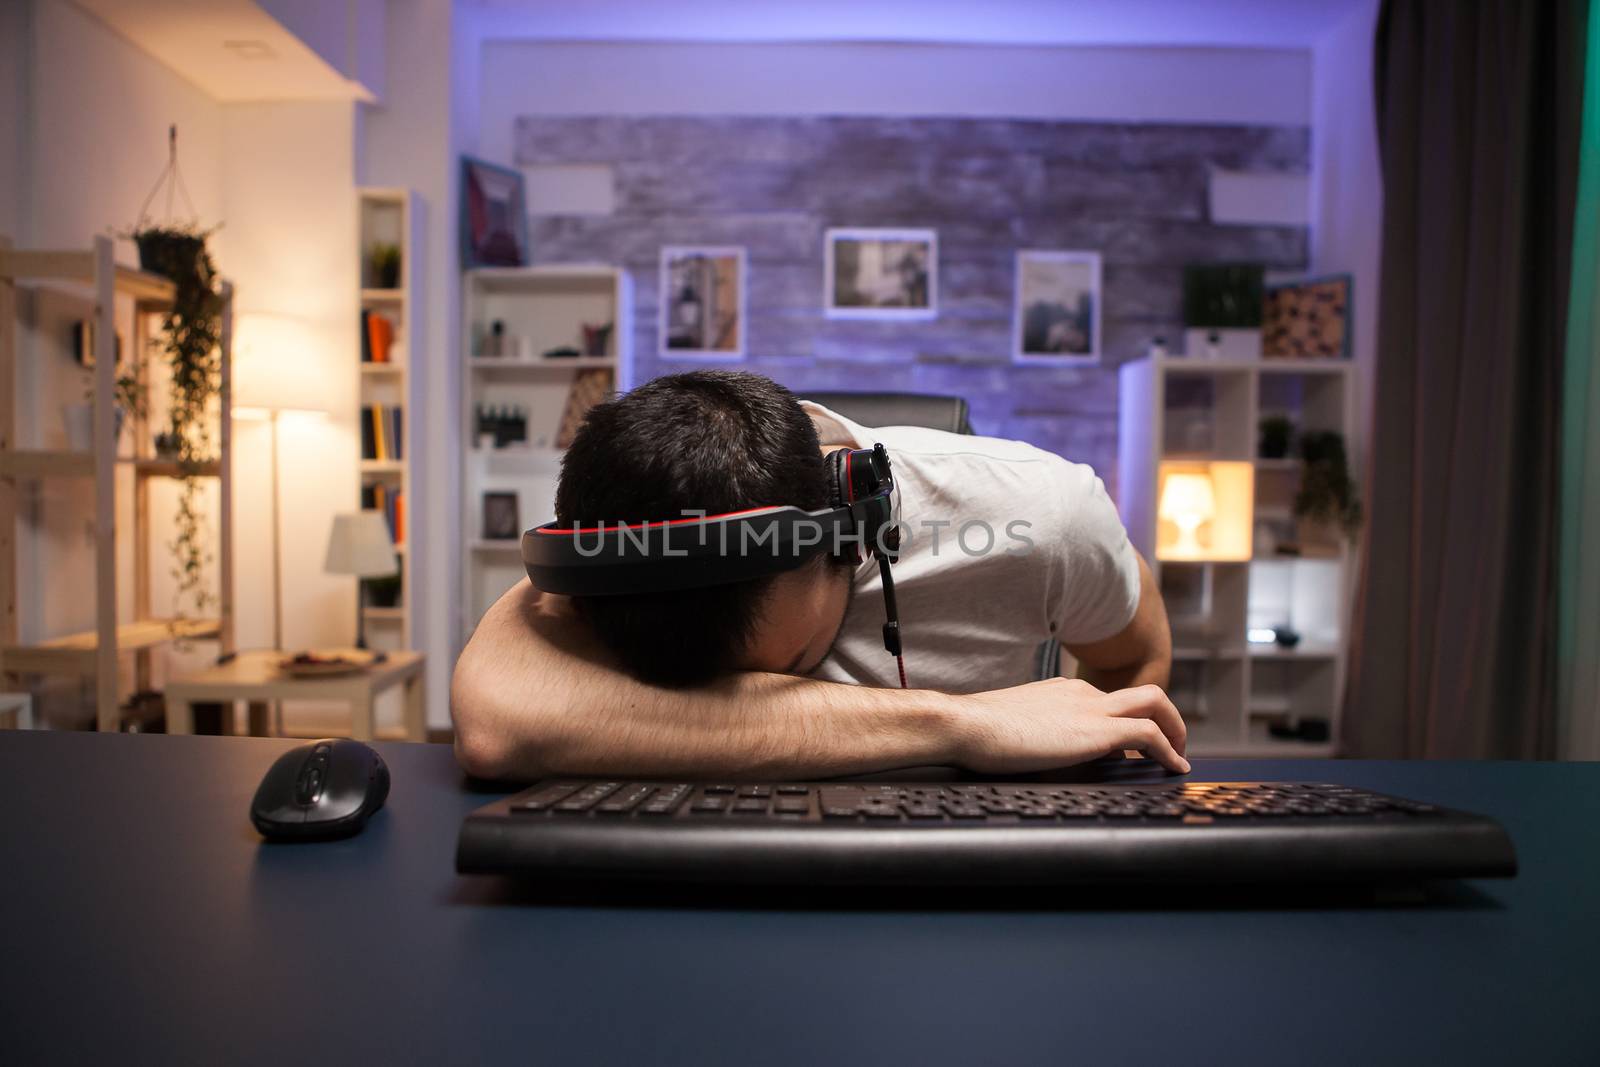 Pov of young man keeping his head on the office after losing and shooter game on stream.